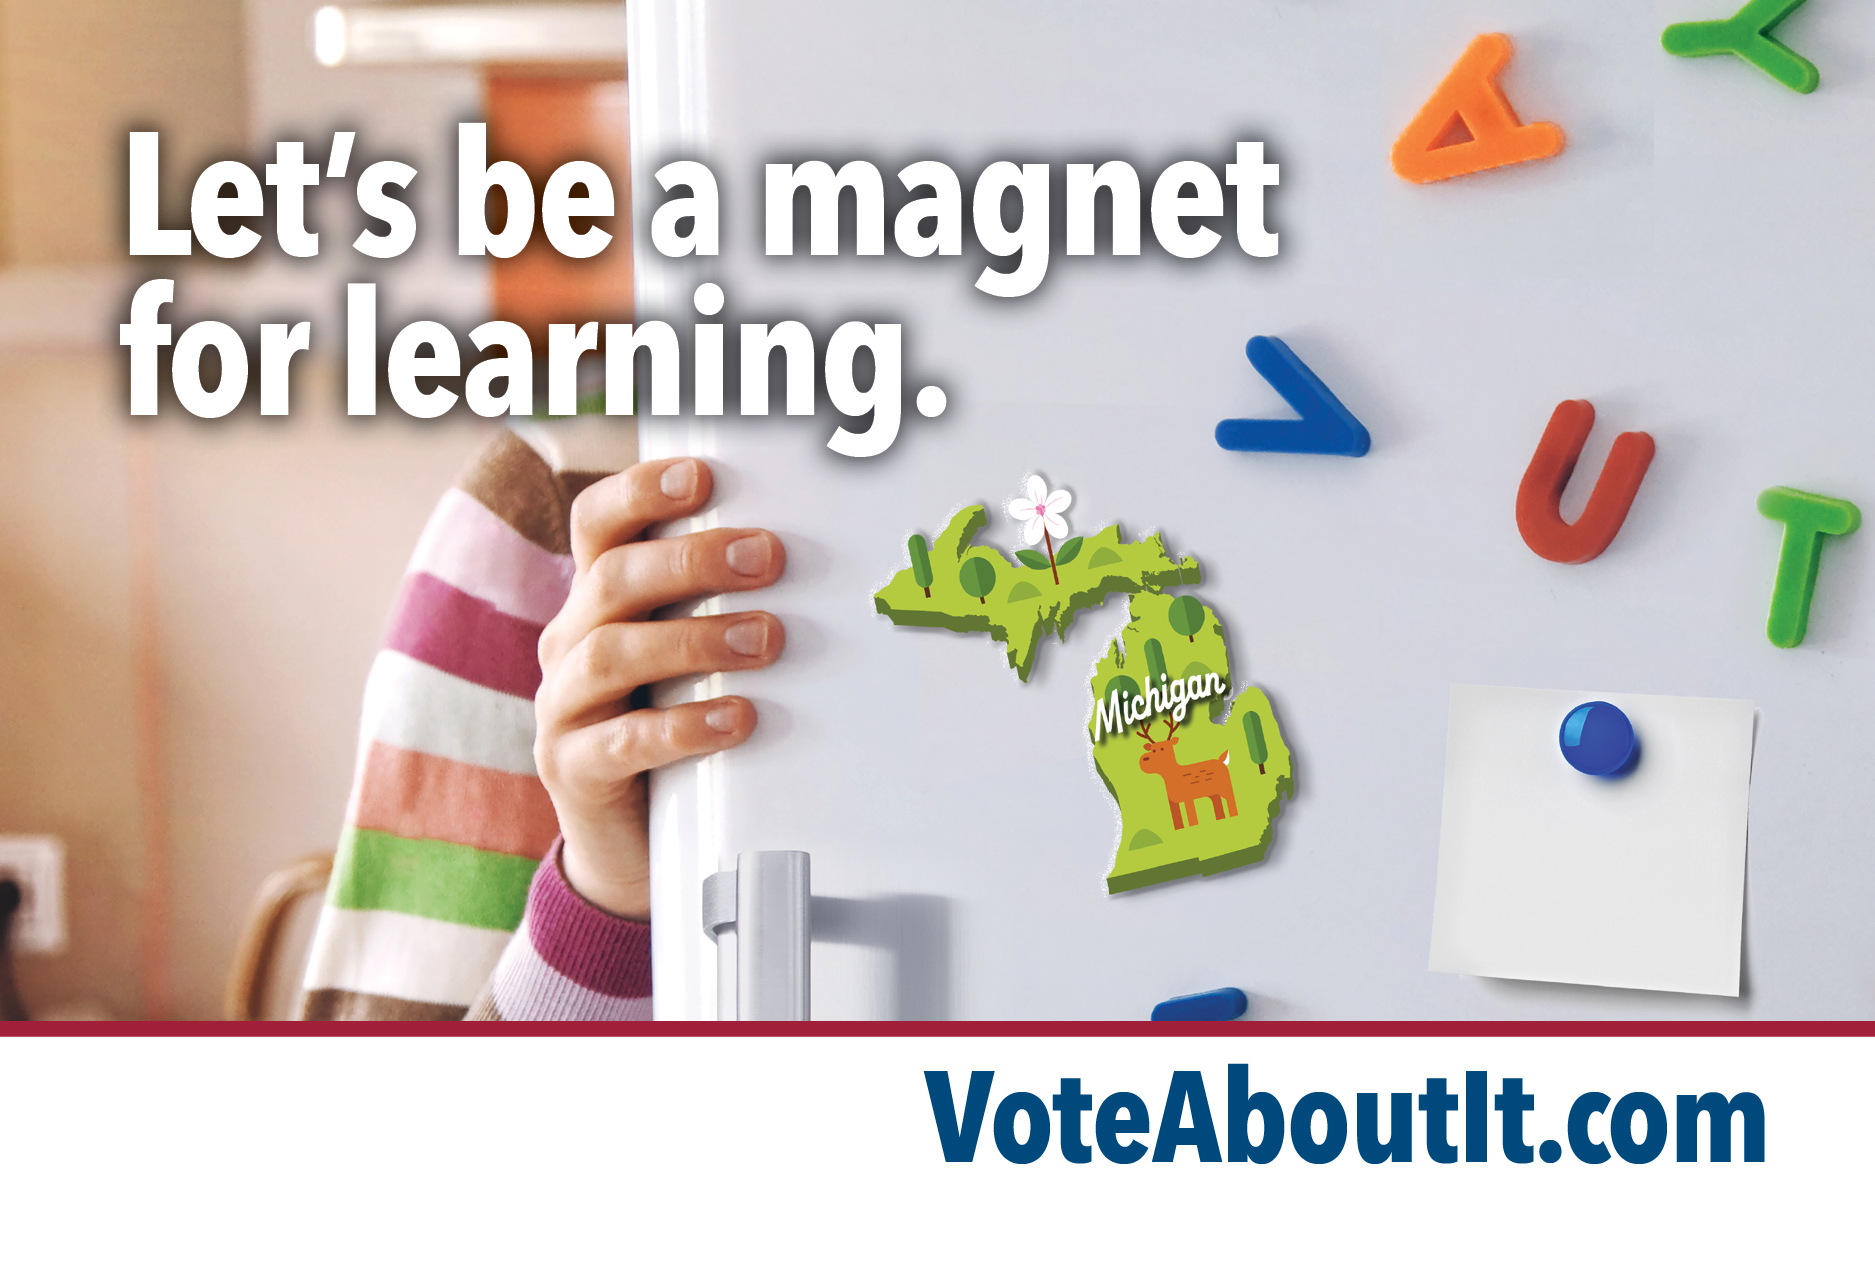 Let's be a magnet for learning.